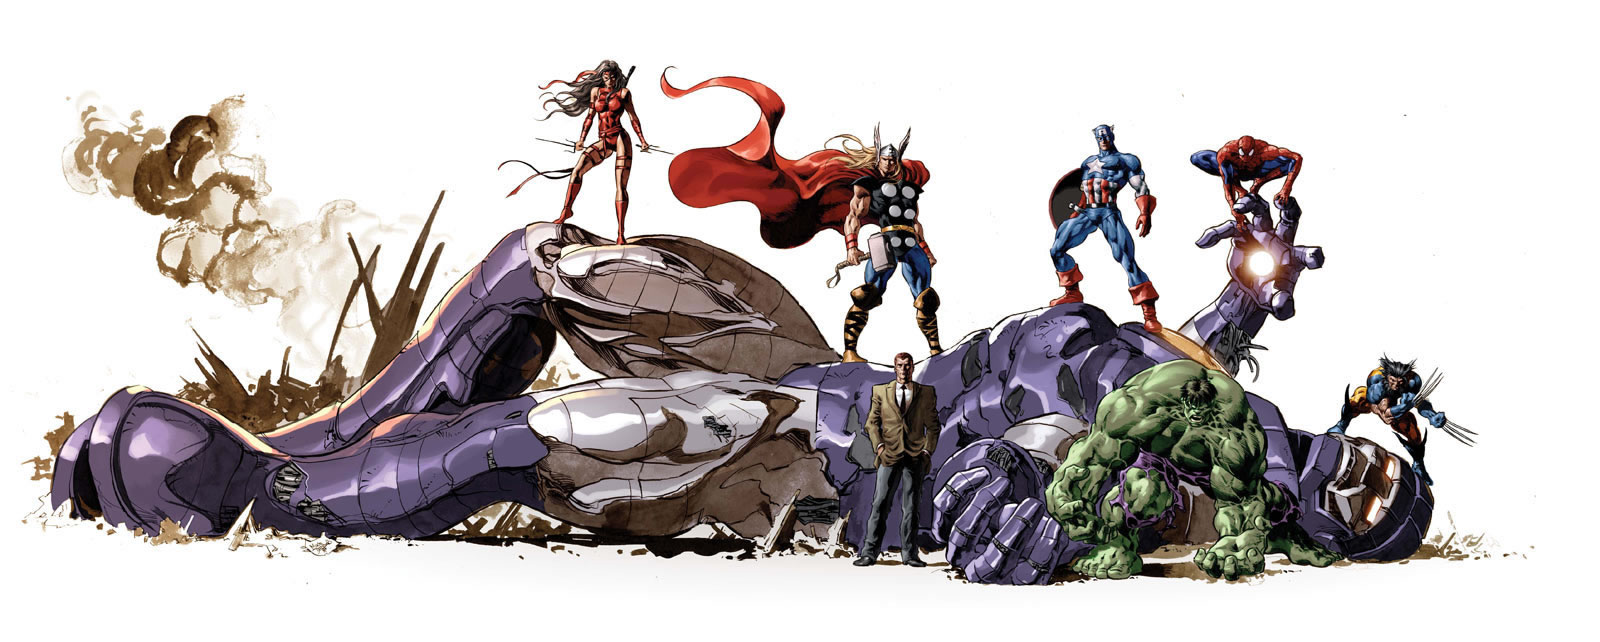 The Marvel Art of Mike Deodato